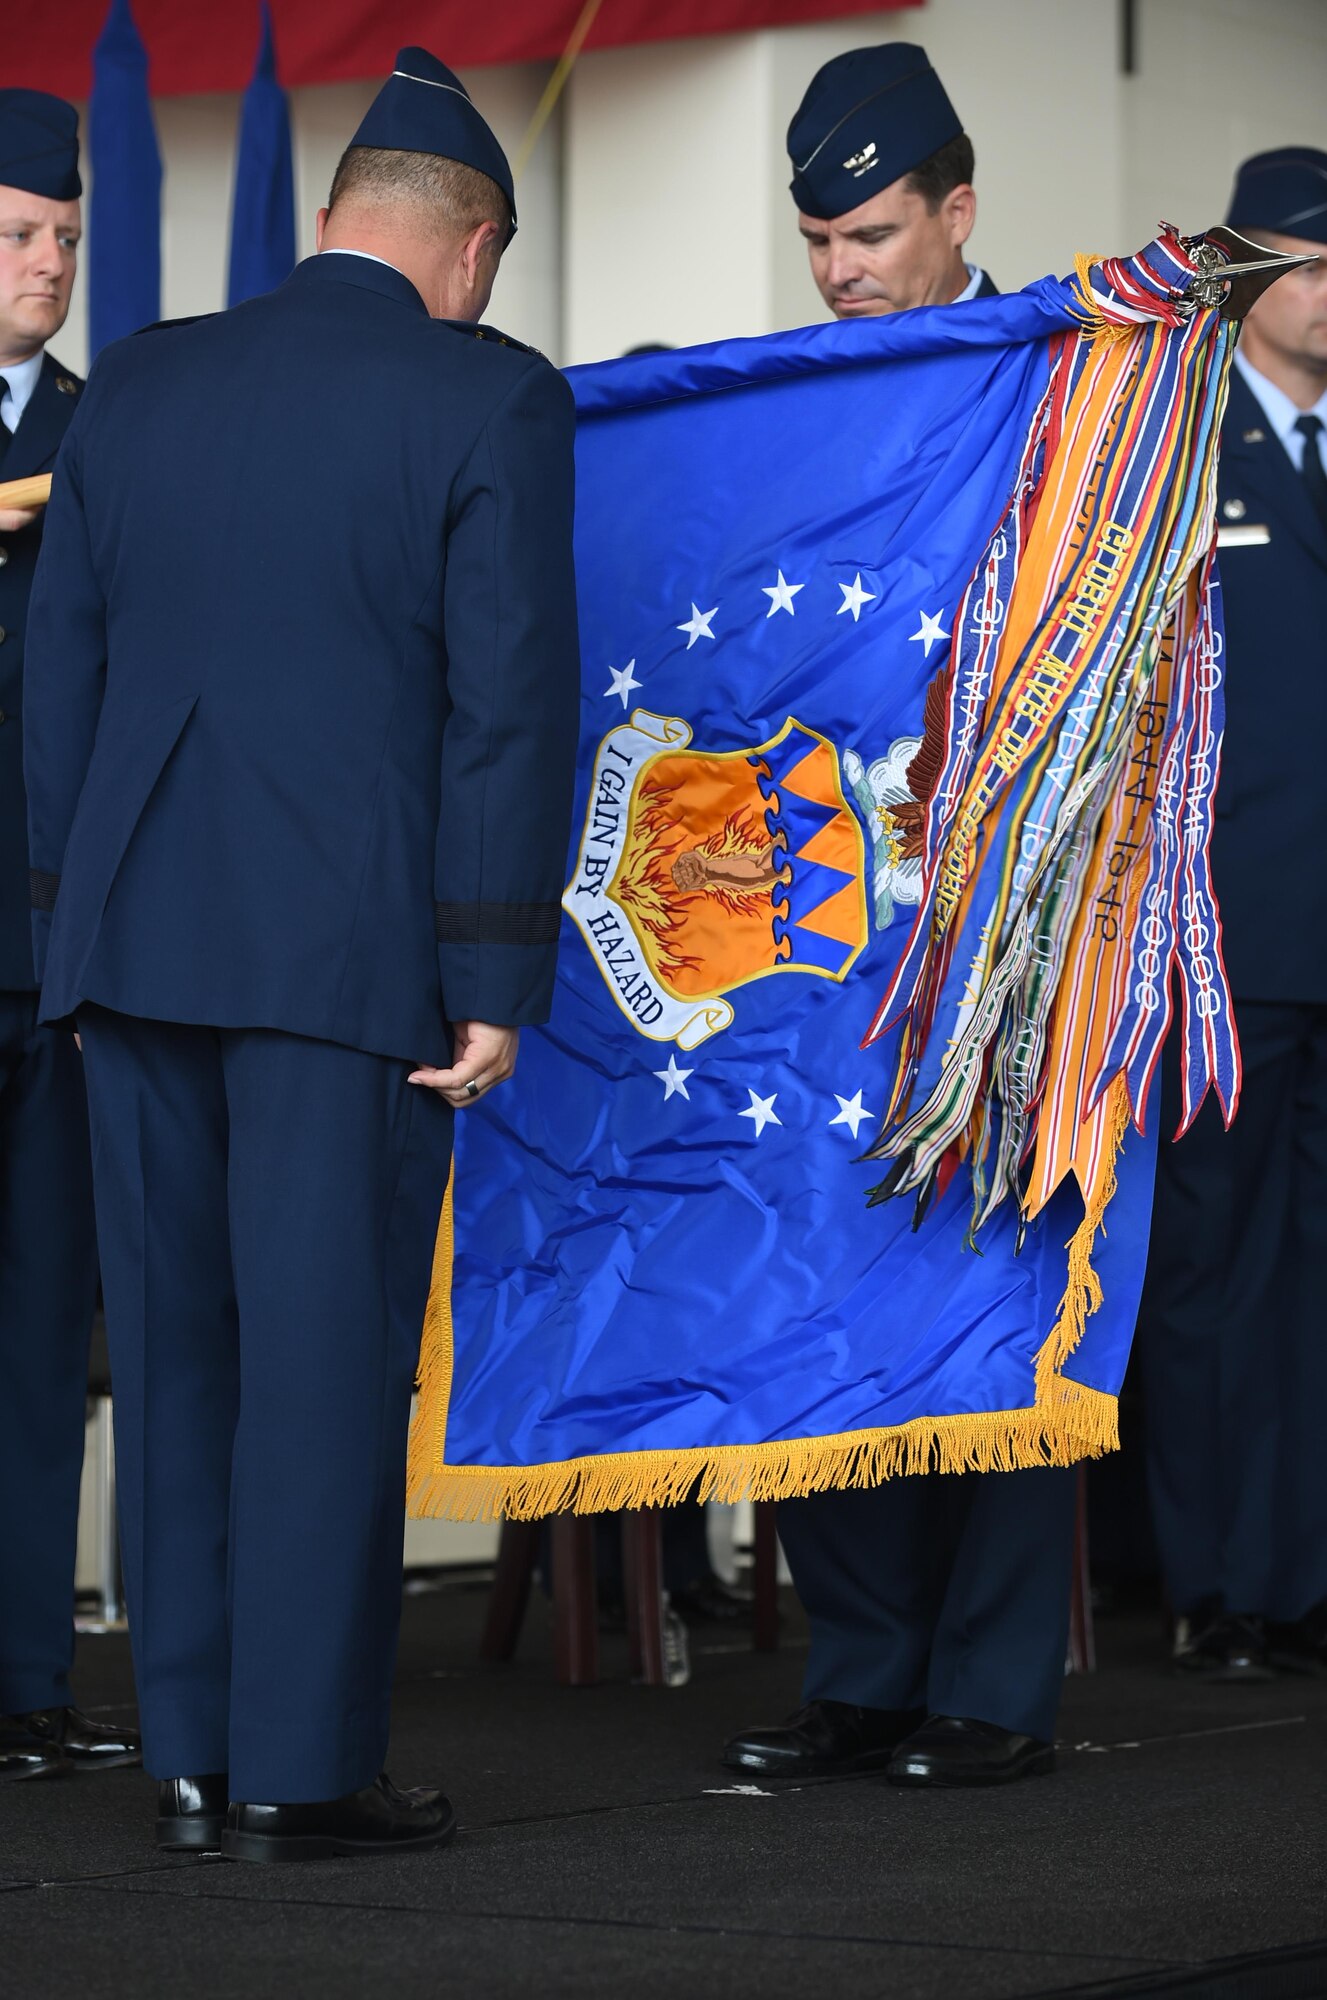 Members of Dyess Honor Guard present the colors during the 317th Airlift Wing activation ceremony at Dyess Air Force Base, Texas, July 6, 2017. Col. David Owens assumed command of the 317th AW, which is now comprised of two groups and five squadrons: the 317th Operations Group,317th Maintenance Group  39th Airlift Squadron, 40th Airlift Squadron, 317th Operations Support Squadron, 317th Aircraft Maintenance Squadron, and 317th Maintenance Squadron. (U.S. Air Force photo by Airman 1st Class Emily Copeland)